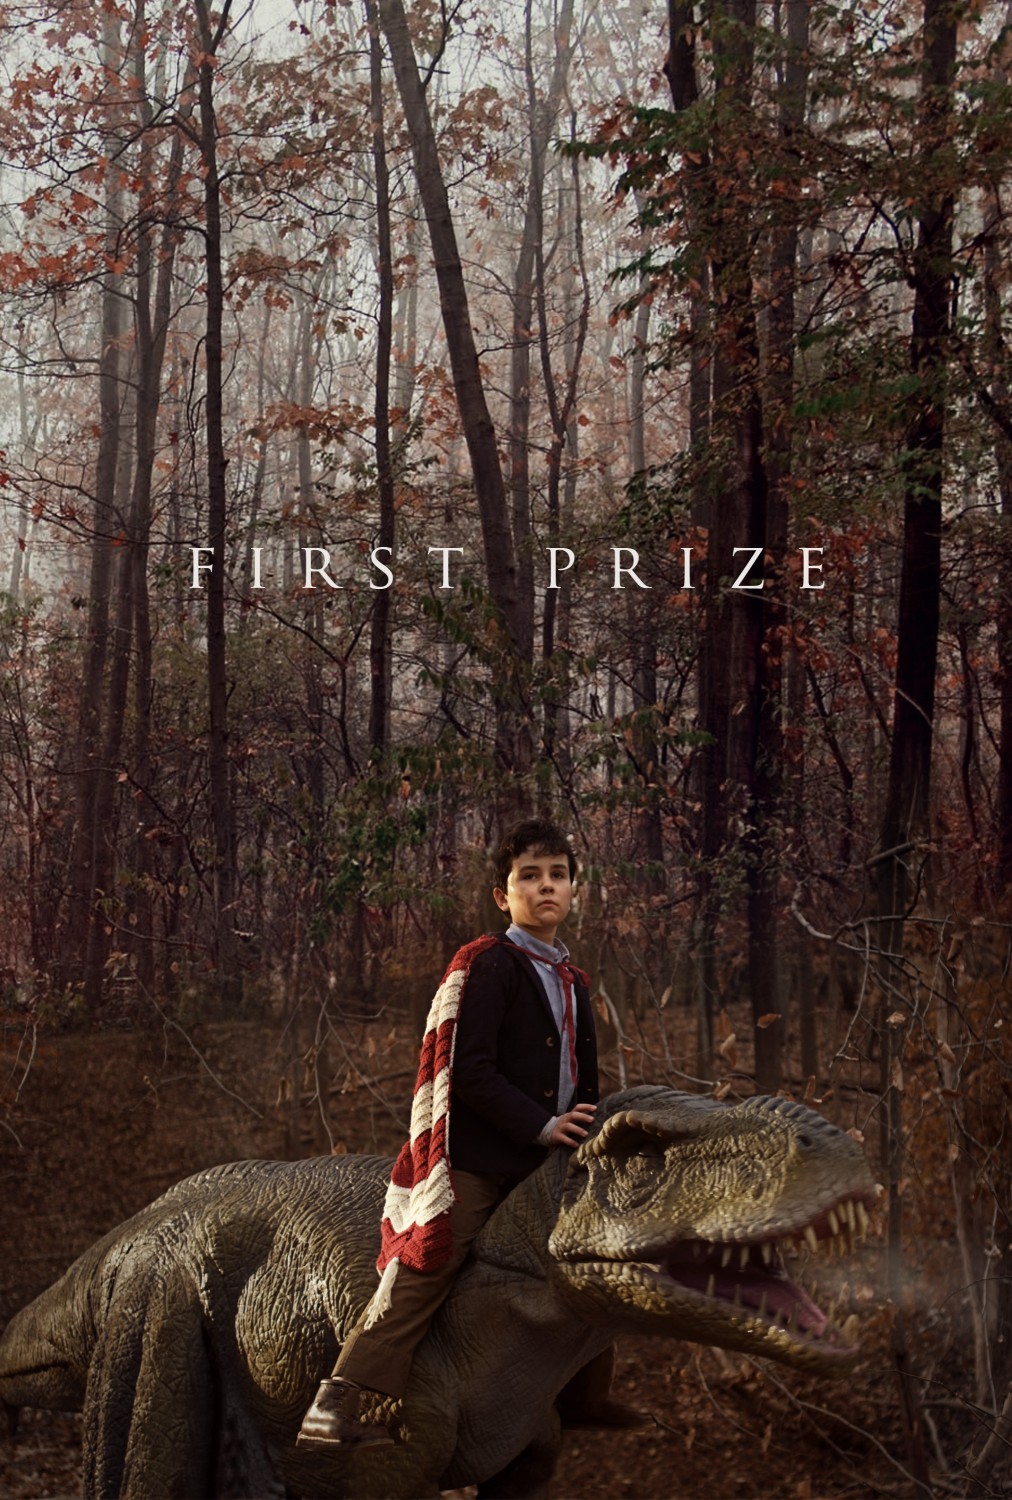 Extra Large Movie Poster Image for First Prize